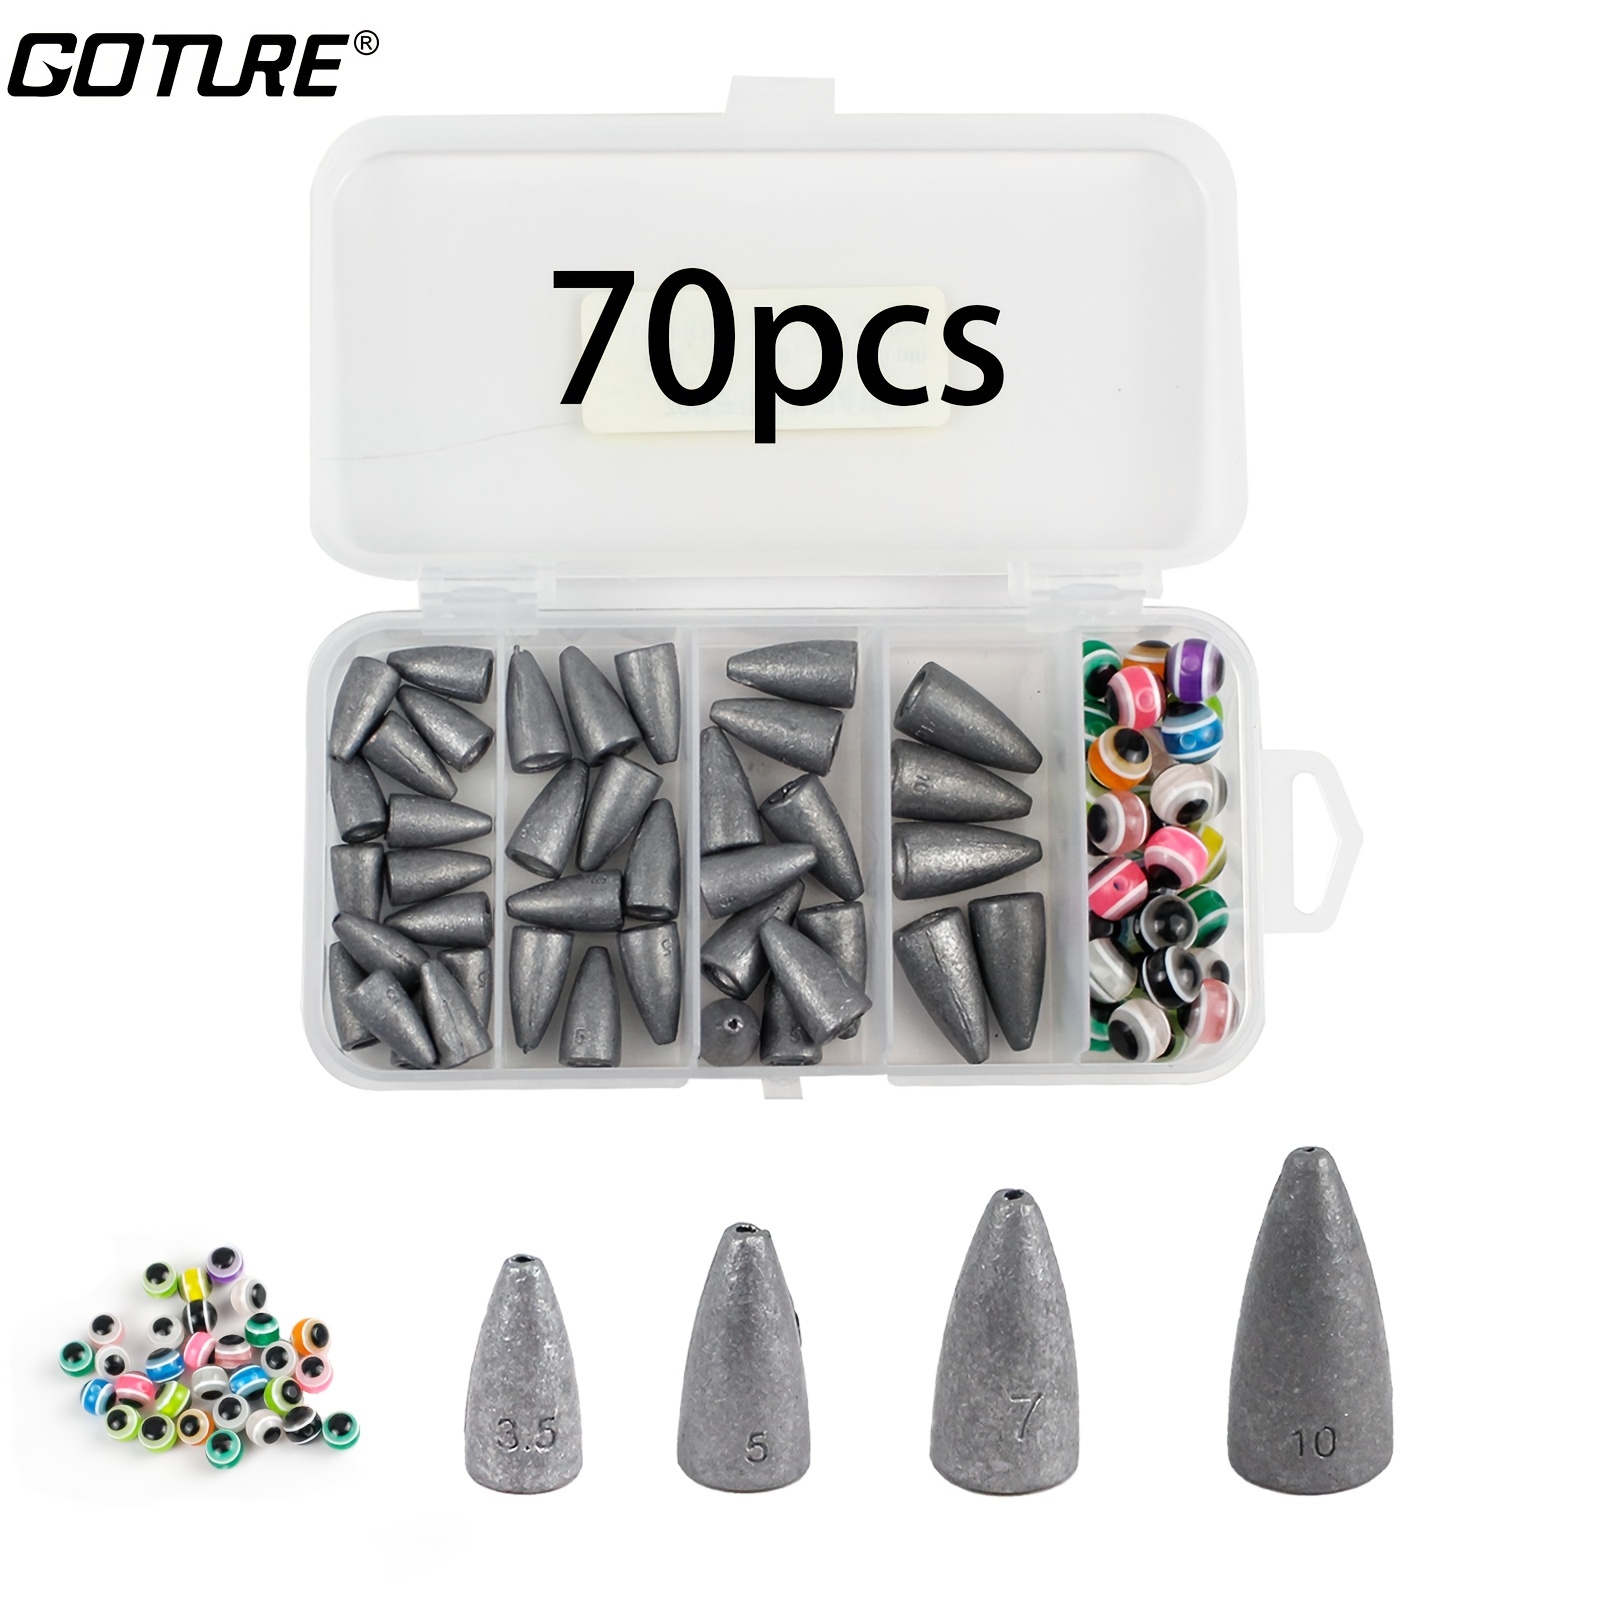 70pcs Goture Fishing Weights And Beads Kit - Slip Bullet Sinkers, Worm  Weights, Fish Eye Beads For Improved Fishing Accuracy And Success